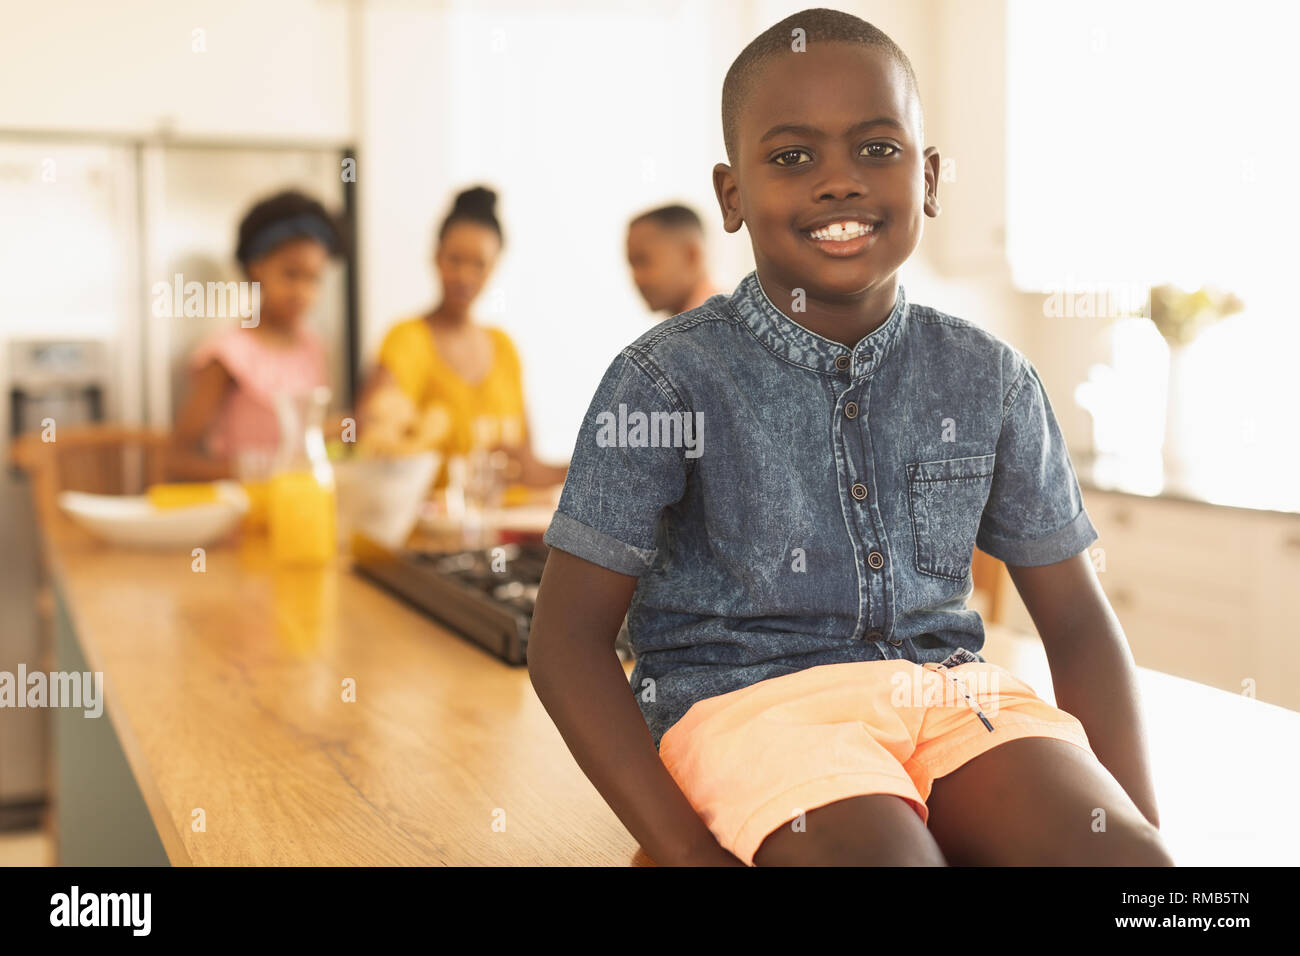 Happy African American boy sitting on dining table Stock Photo